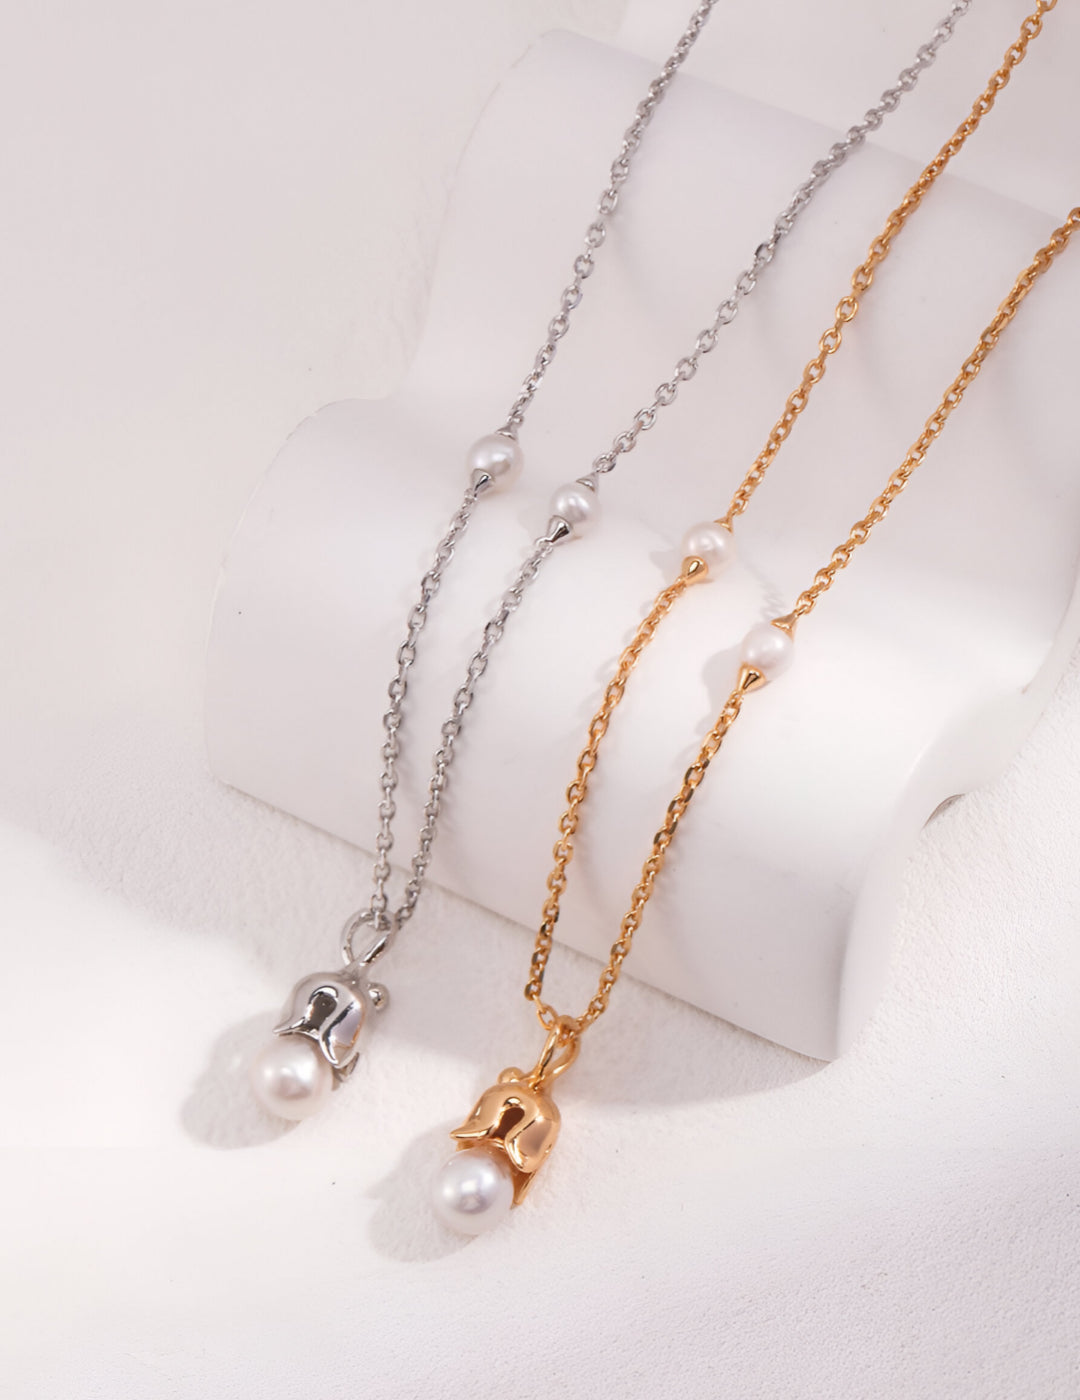 Necklace with Delicate beauty of a tulip bud - Grace with a pearl  - S925 Sterling Silver with 18K Gold Vermeil - Pearl Luminance - a gorgeous accessory that adds a touch of elegance to any look - Handcrafted with love - this necklace is perfect for every occasion